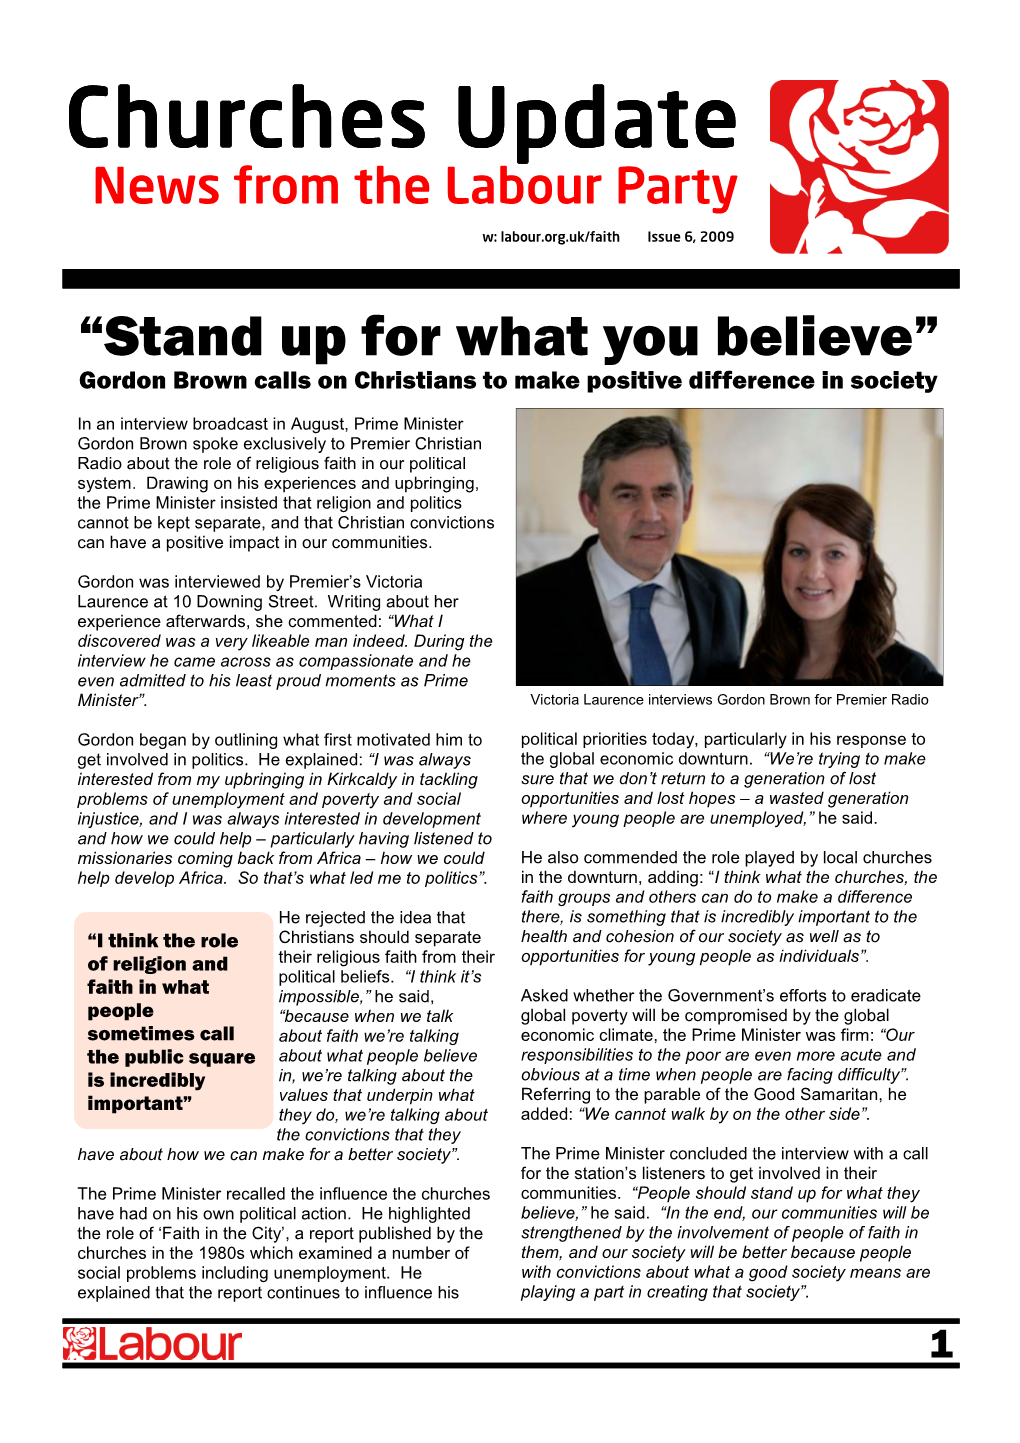 Churches Update: News from the Labour Party (Issue 6, 2009)